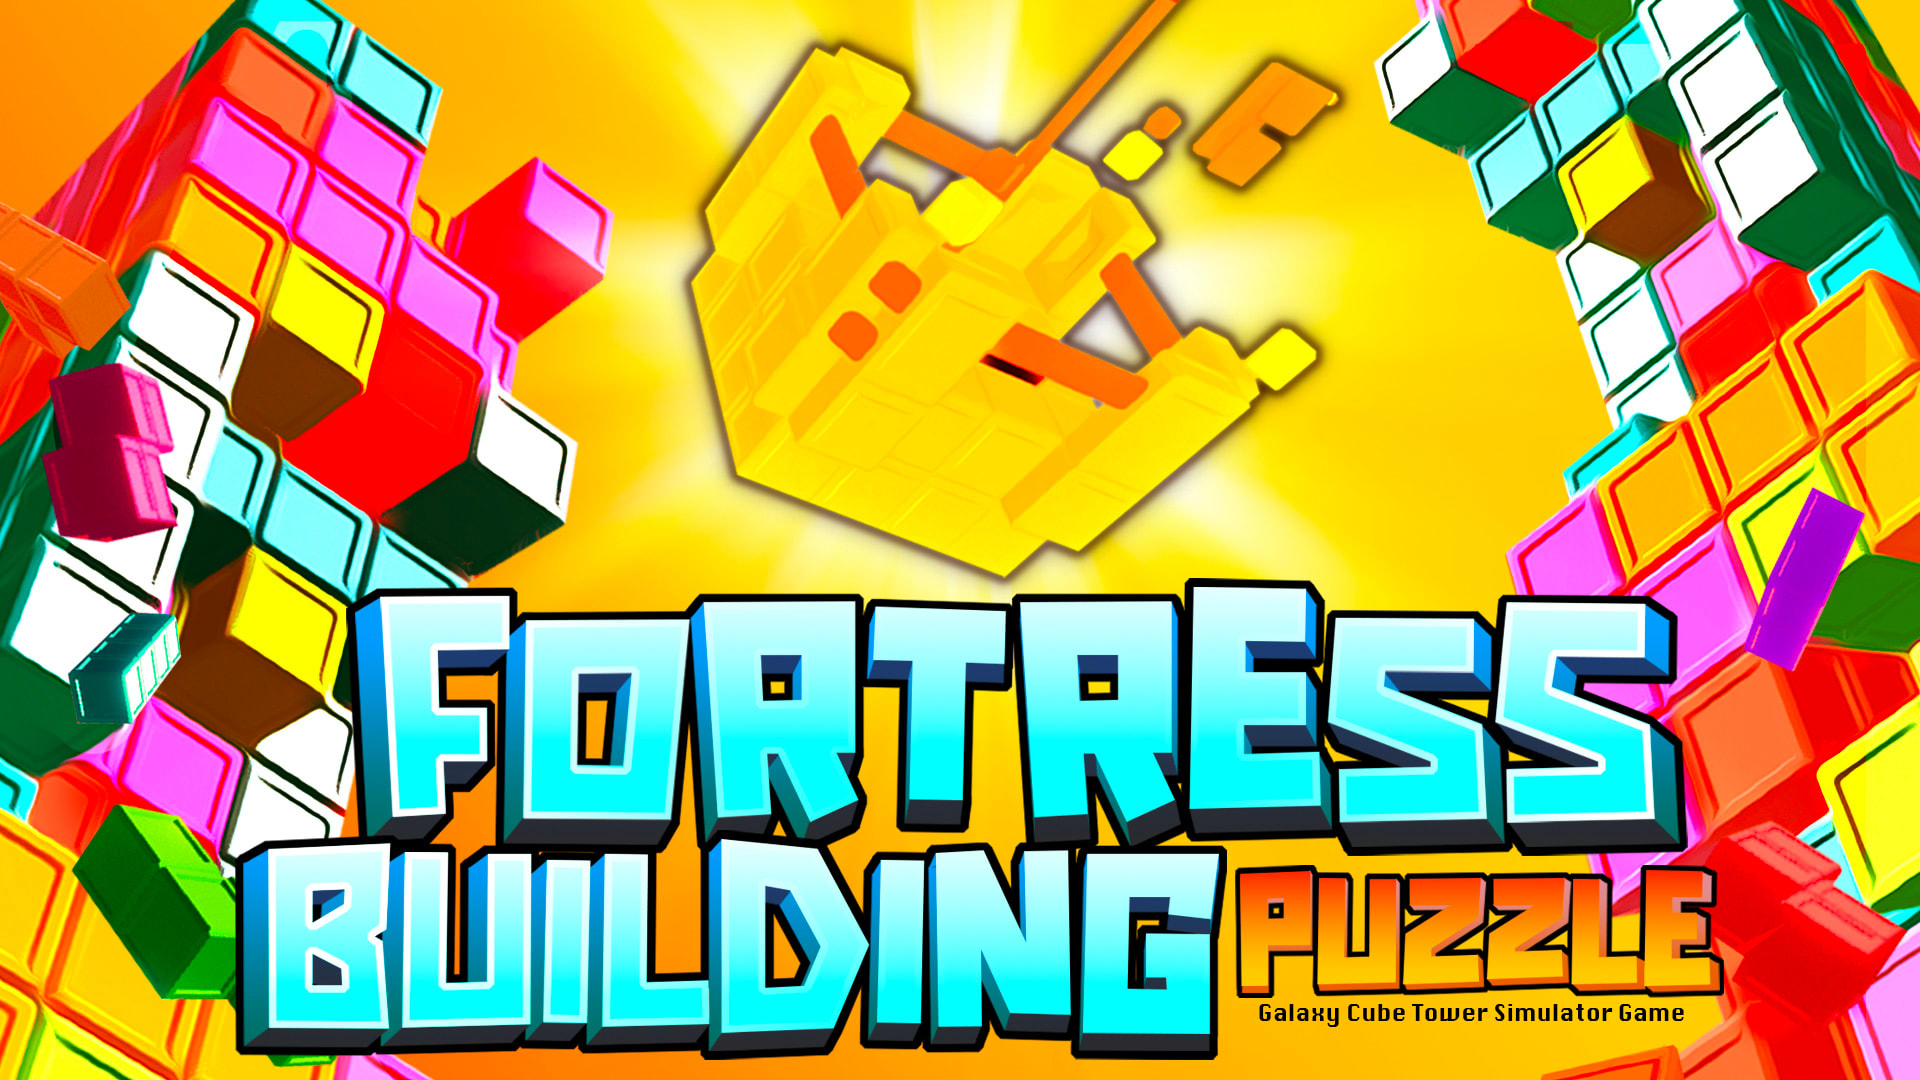 Fortress Building Puzzle - Galaxy Cube Tower Simulator Game 1